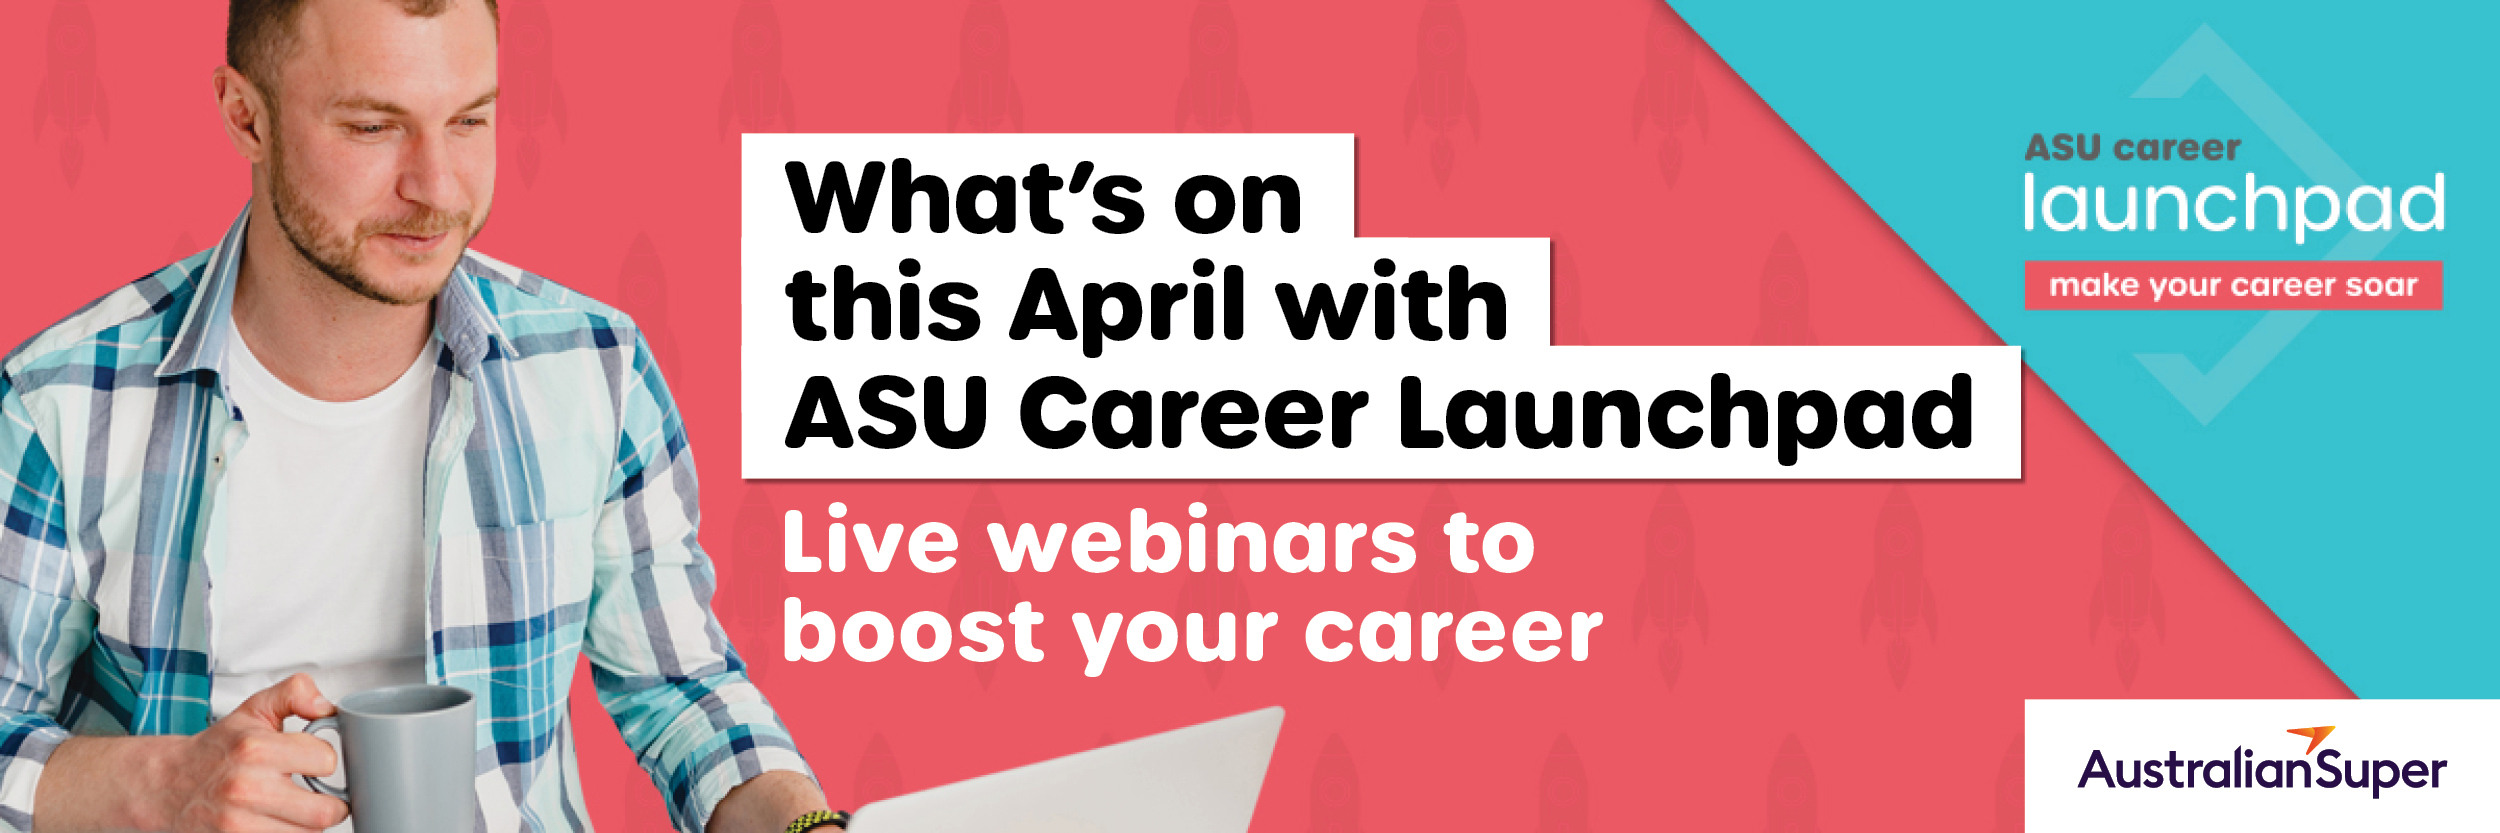 What's on this April with ASU Career Launchpad: Live webinars to boost your career